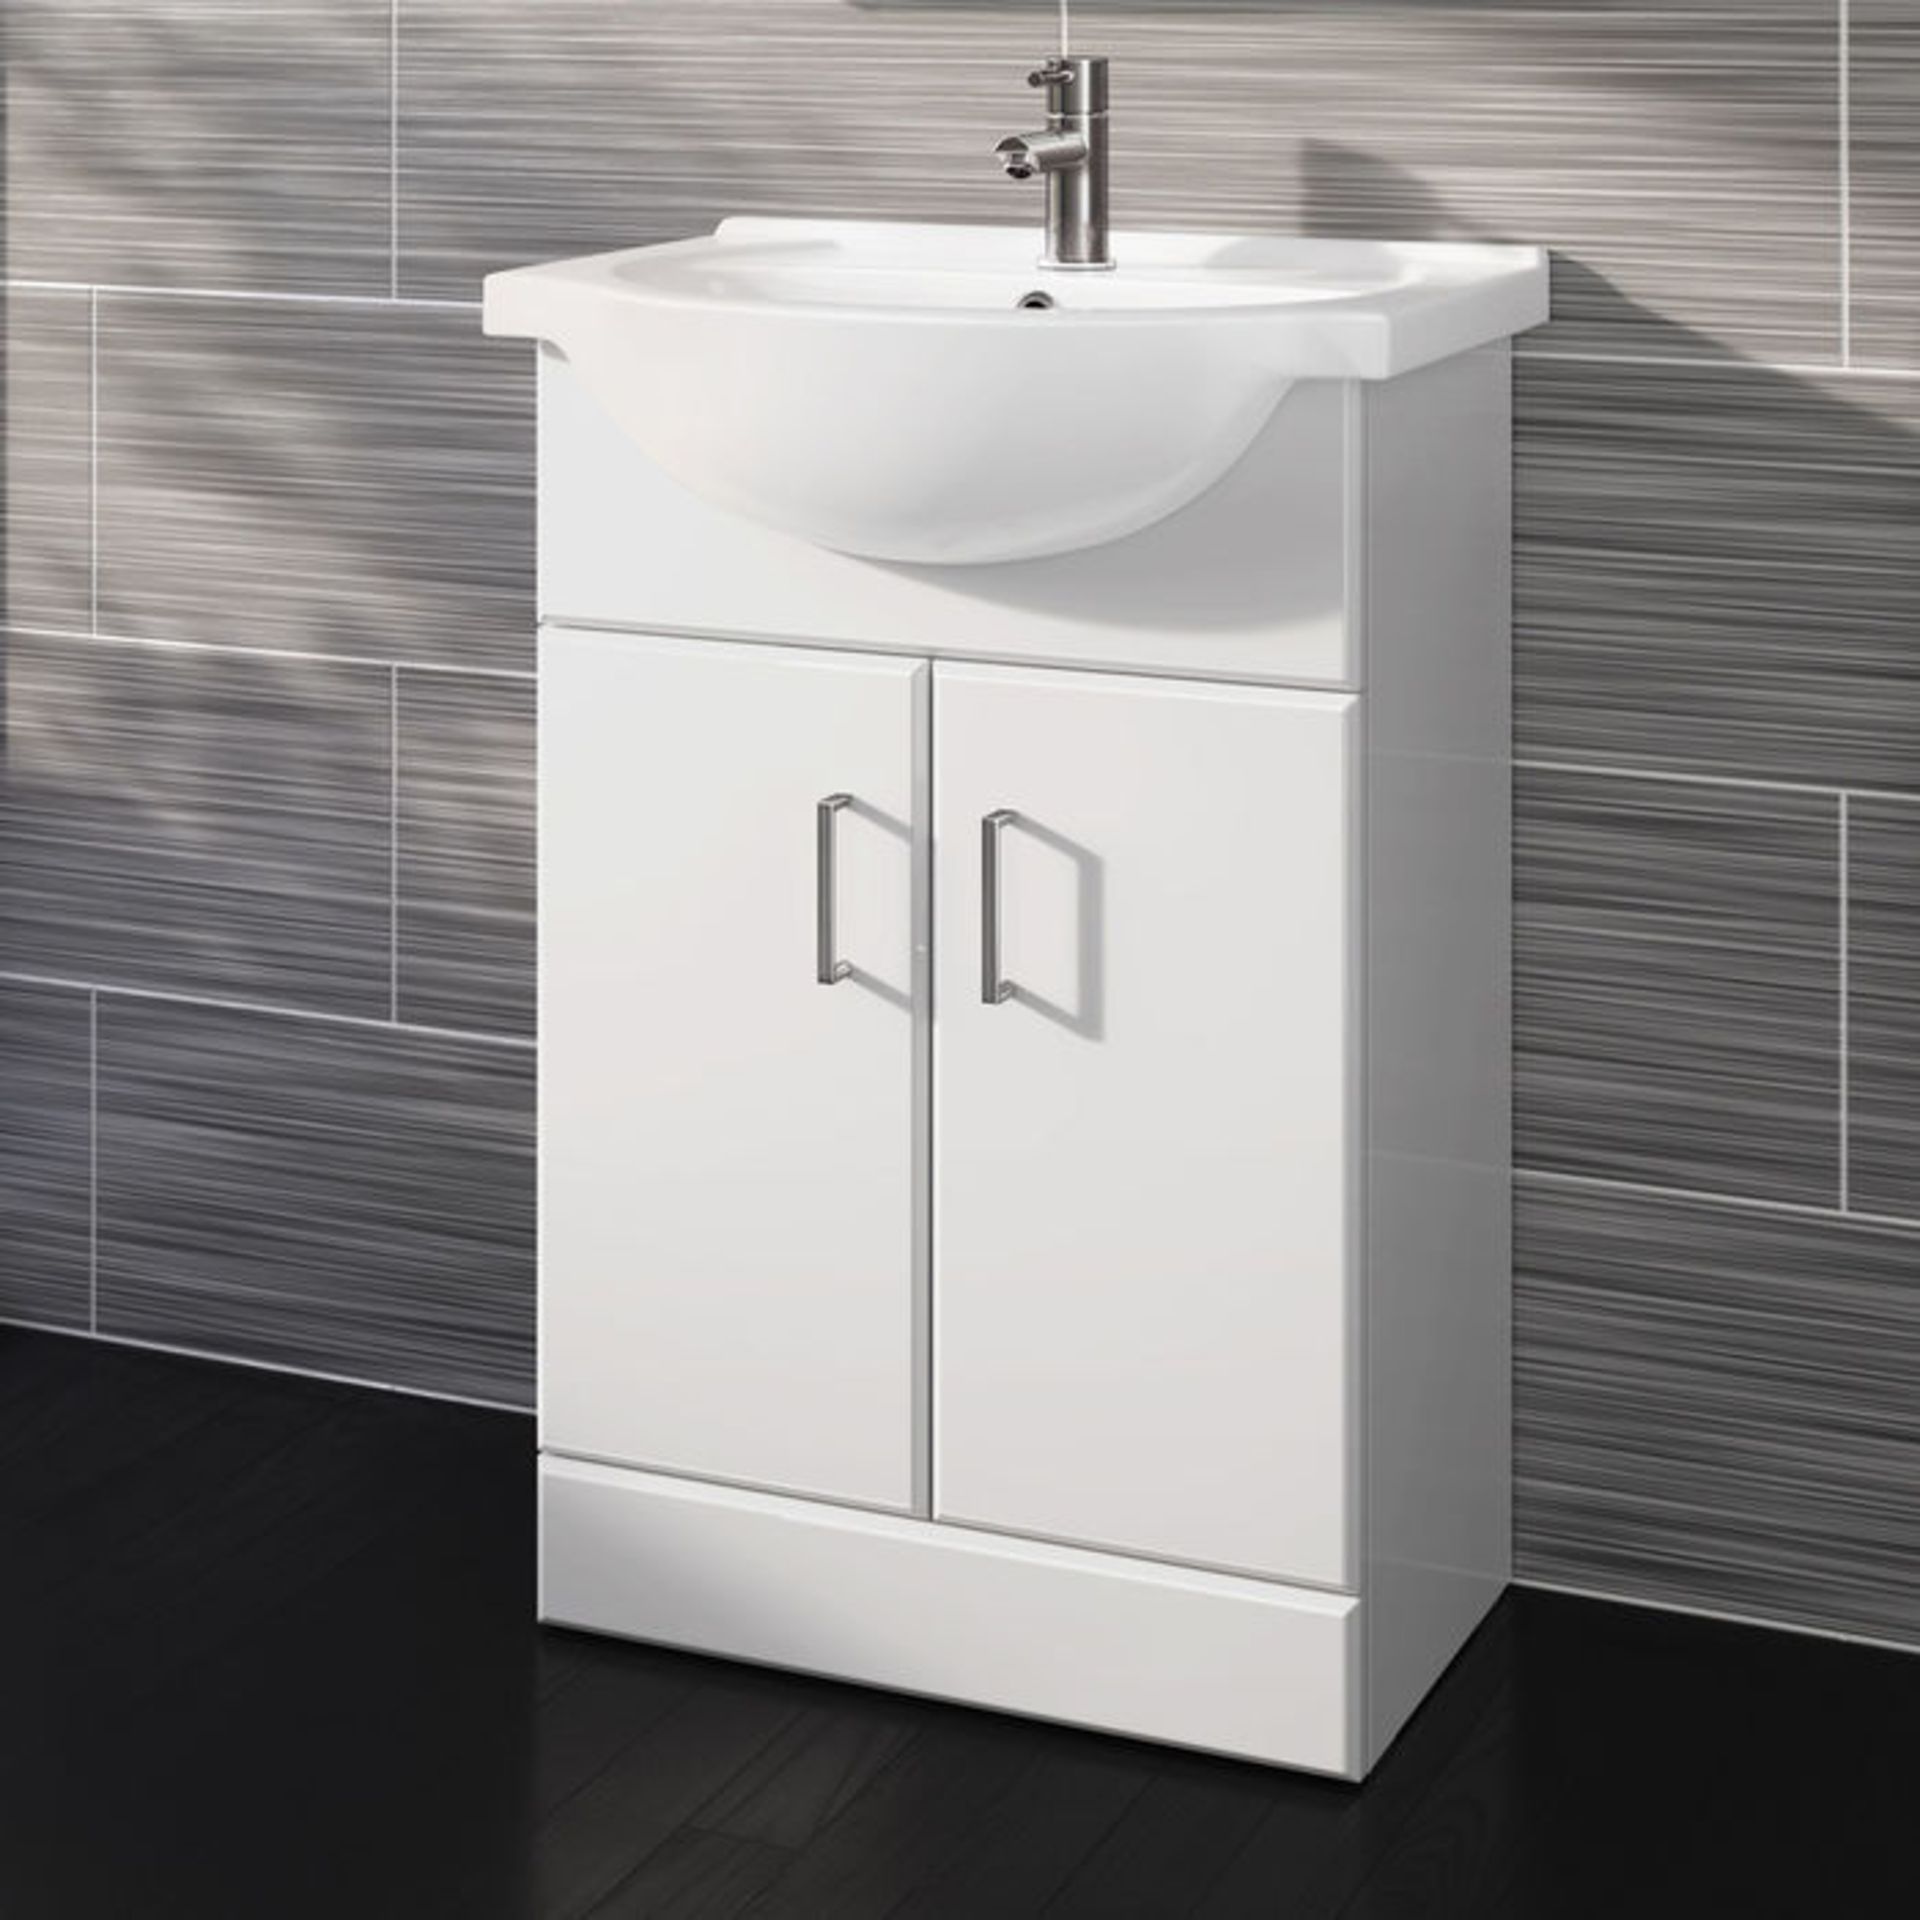 (TA201) 550x300mm Quartz Gloss White Built In Basin Cabinet. RRP £349.99. Comes complete with basin.